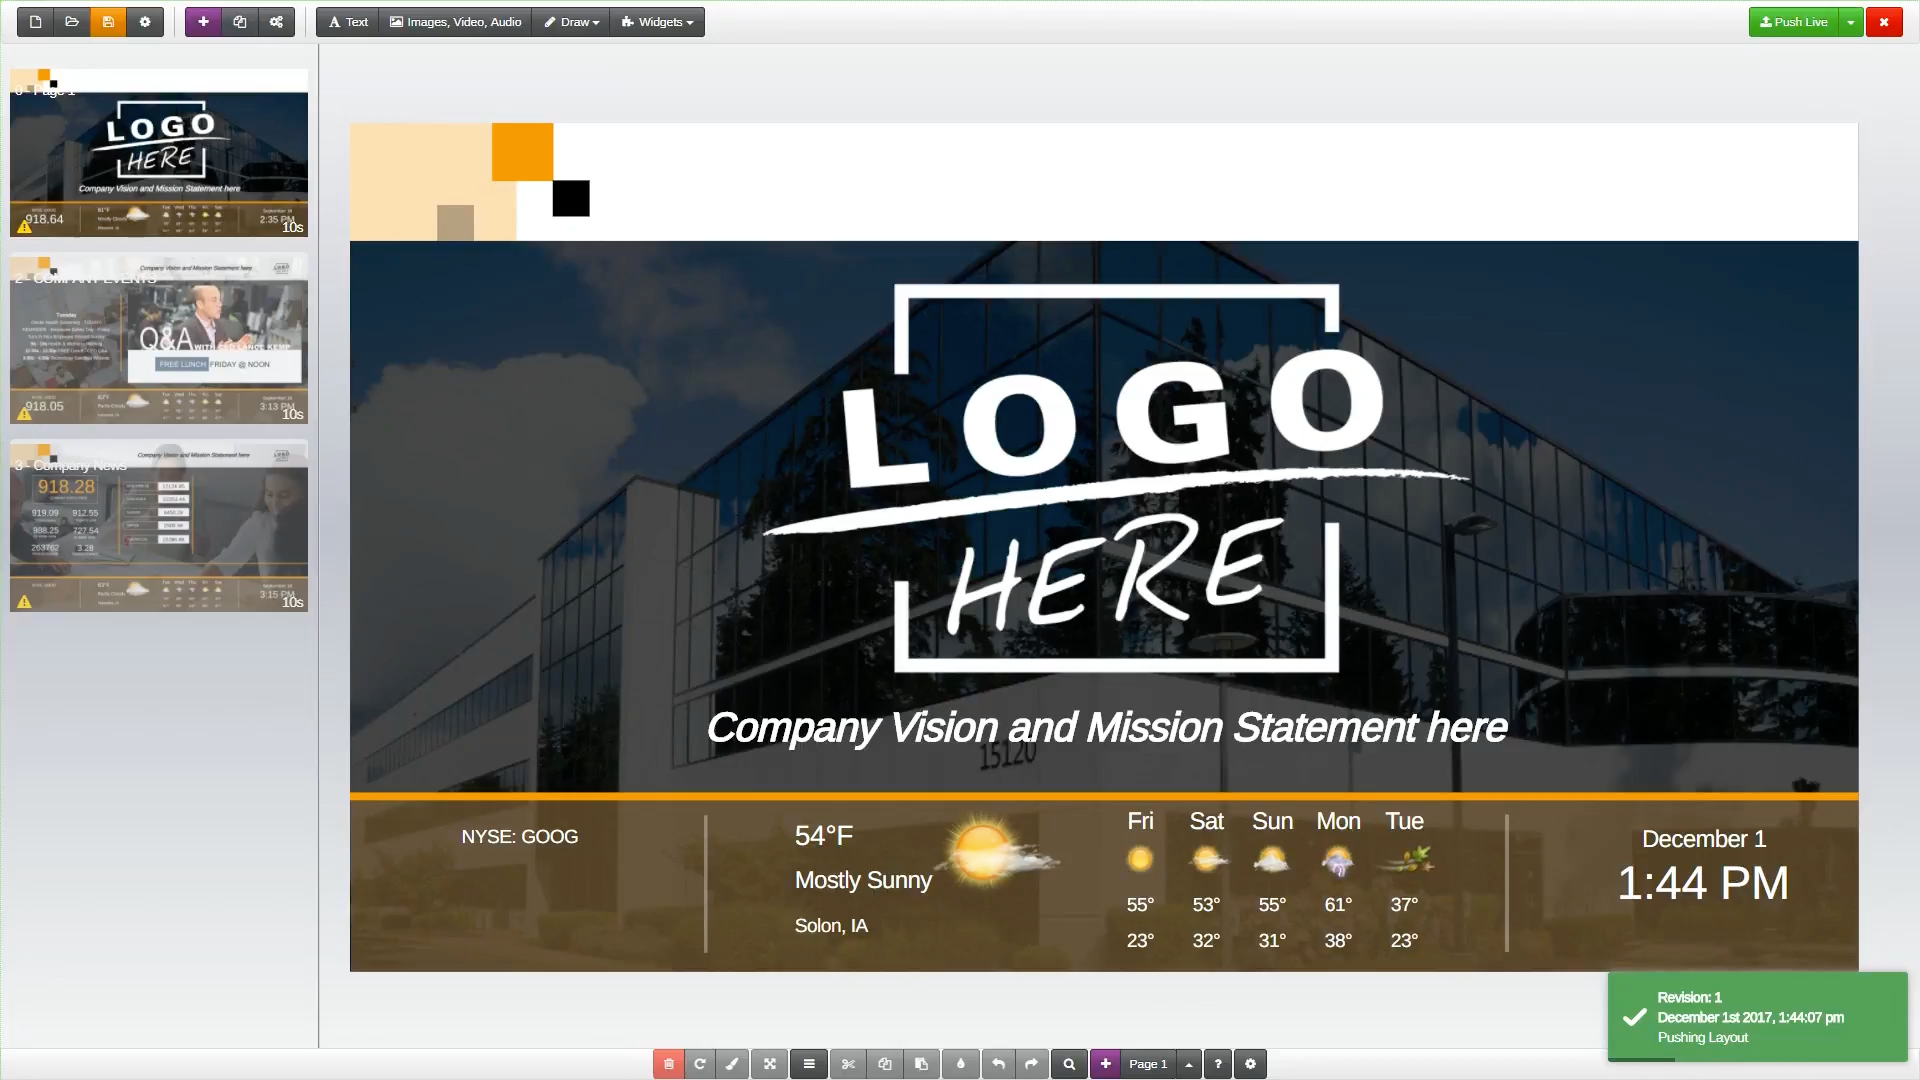 Arreya Software - Presentations can be edited using the WYSIWYG editor and drag & drop interface which allows users to add images, video, audio, widgets, and more